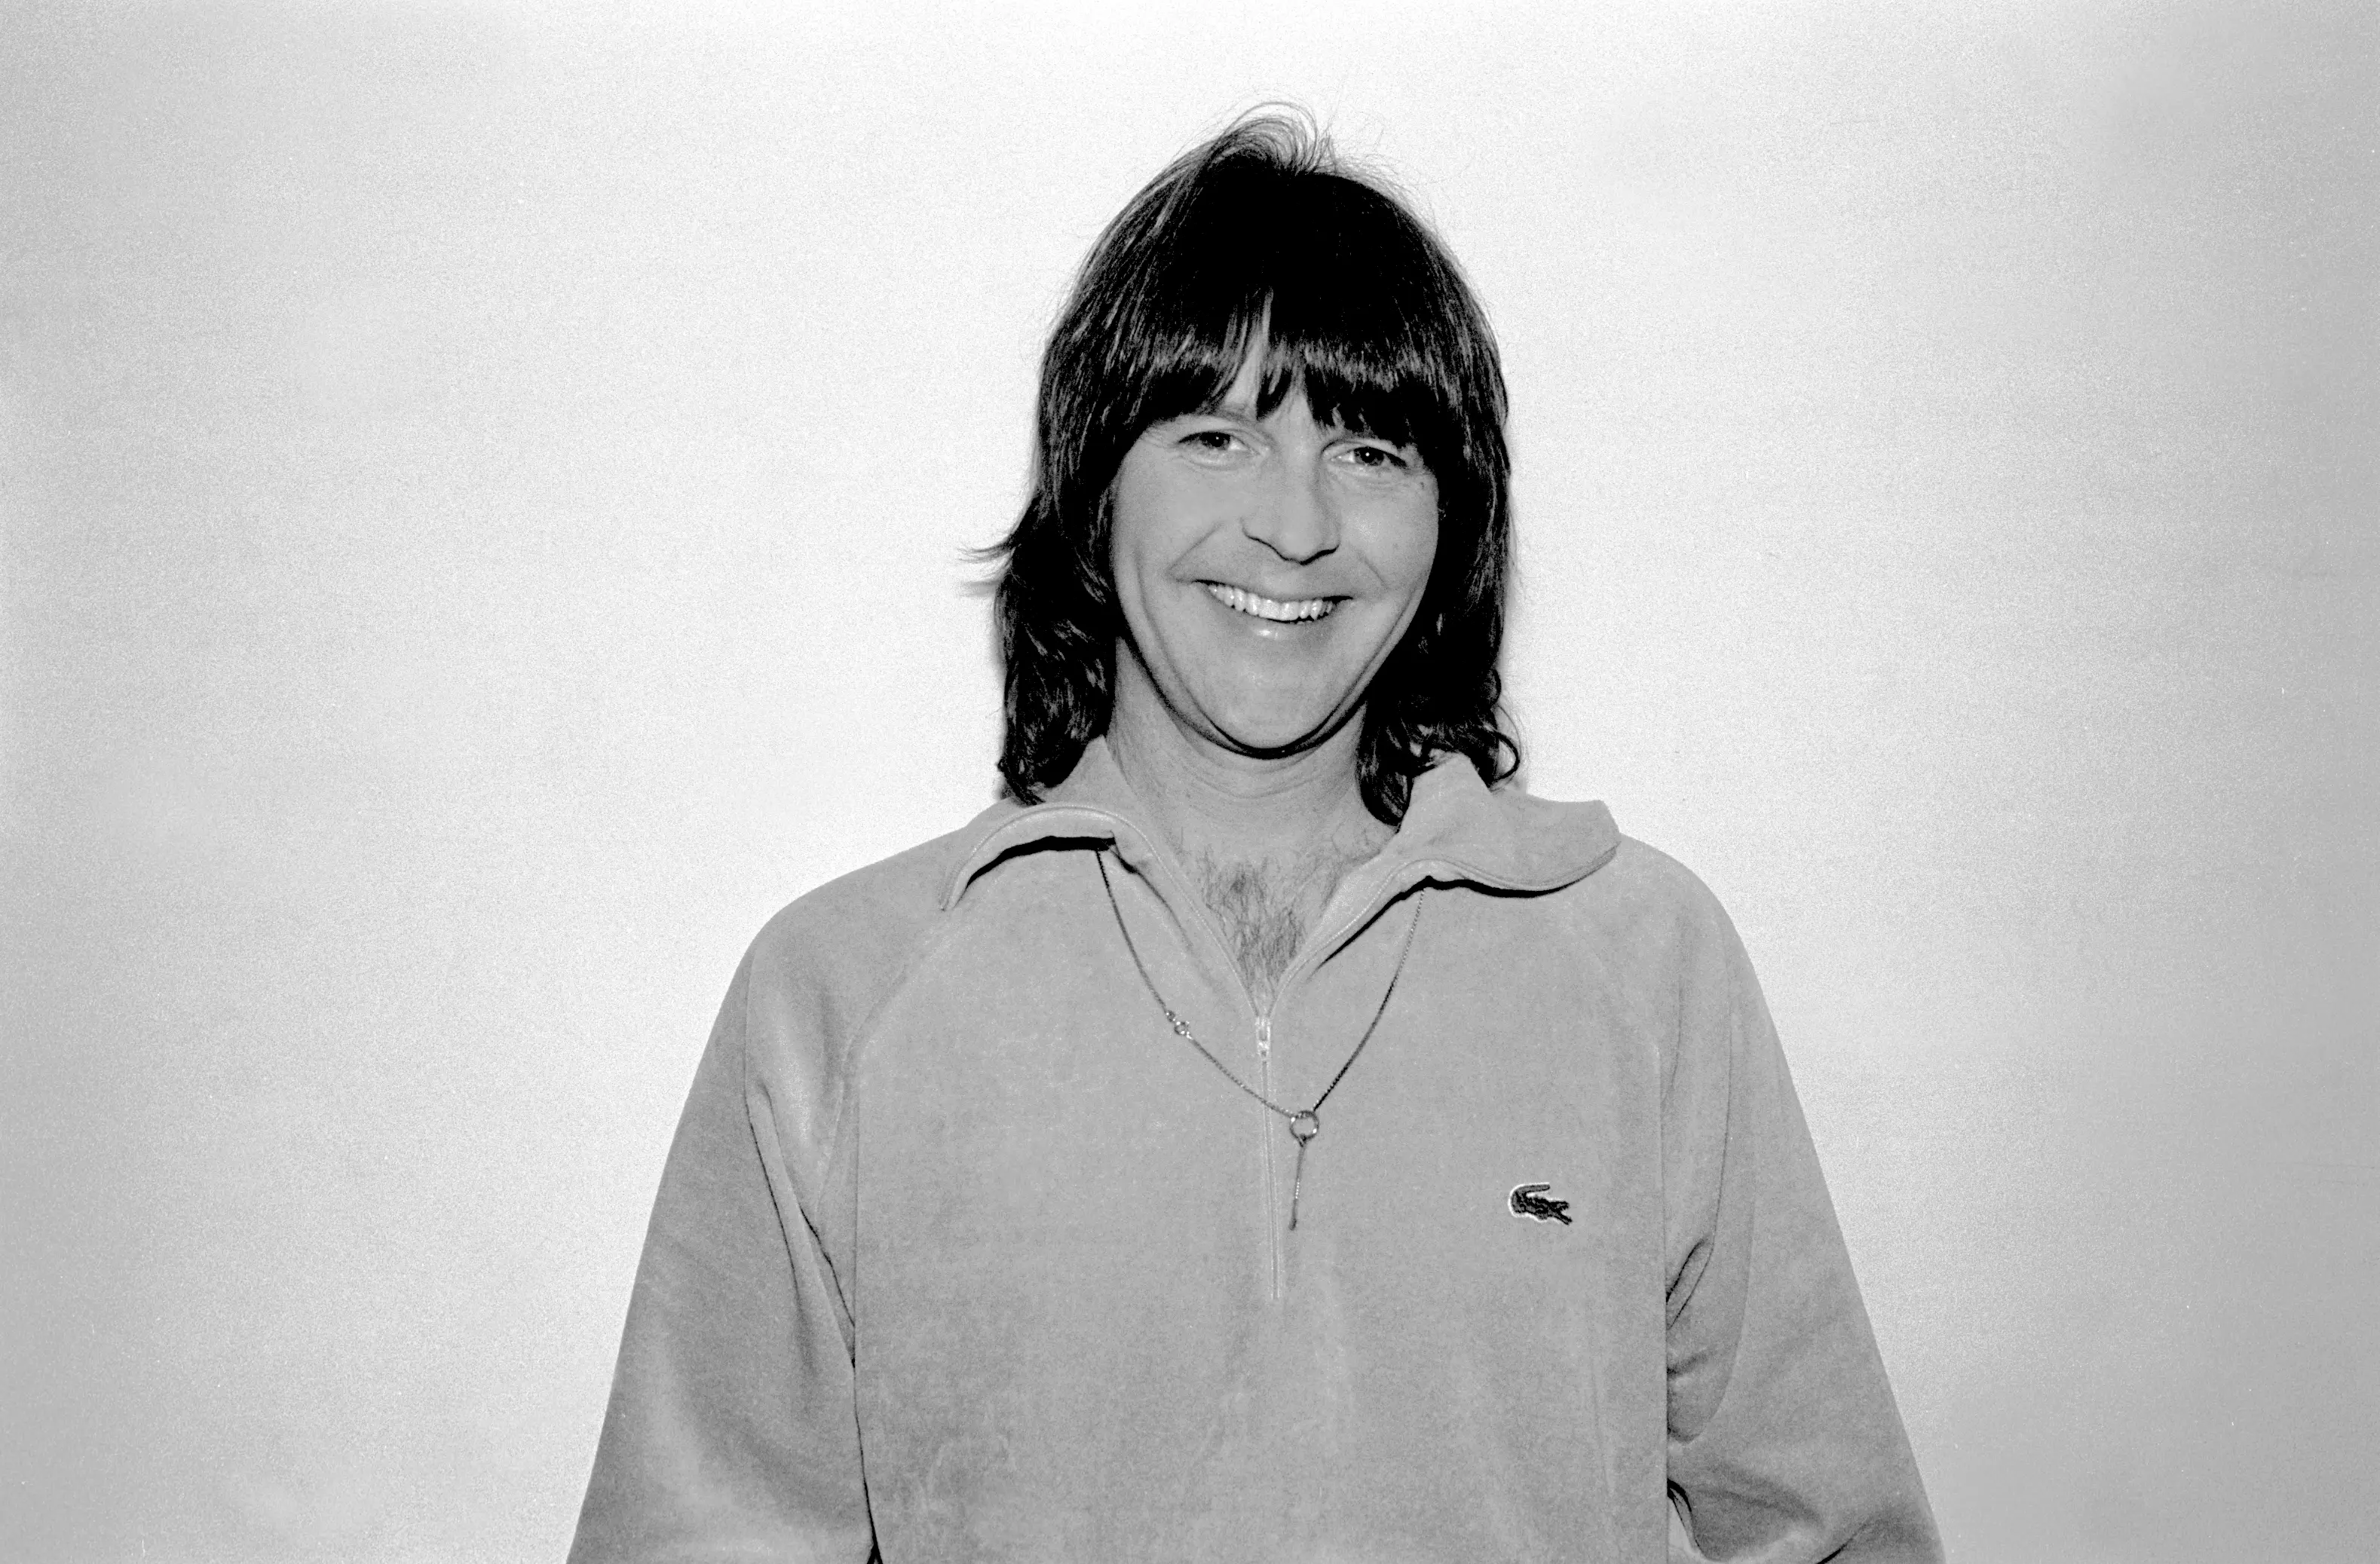 black and white photo of Randy Meisner from 1981